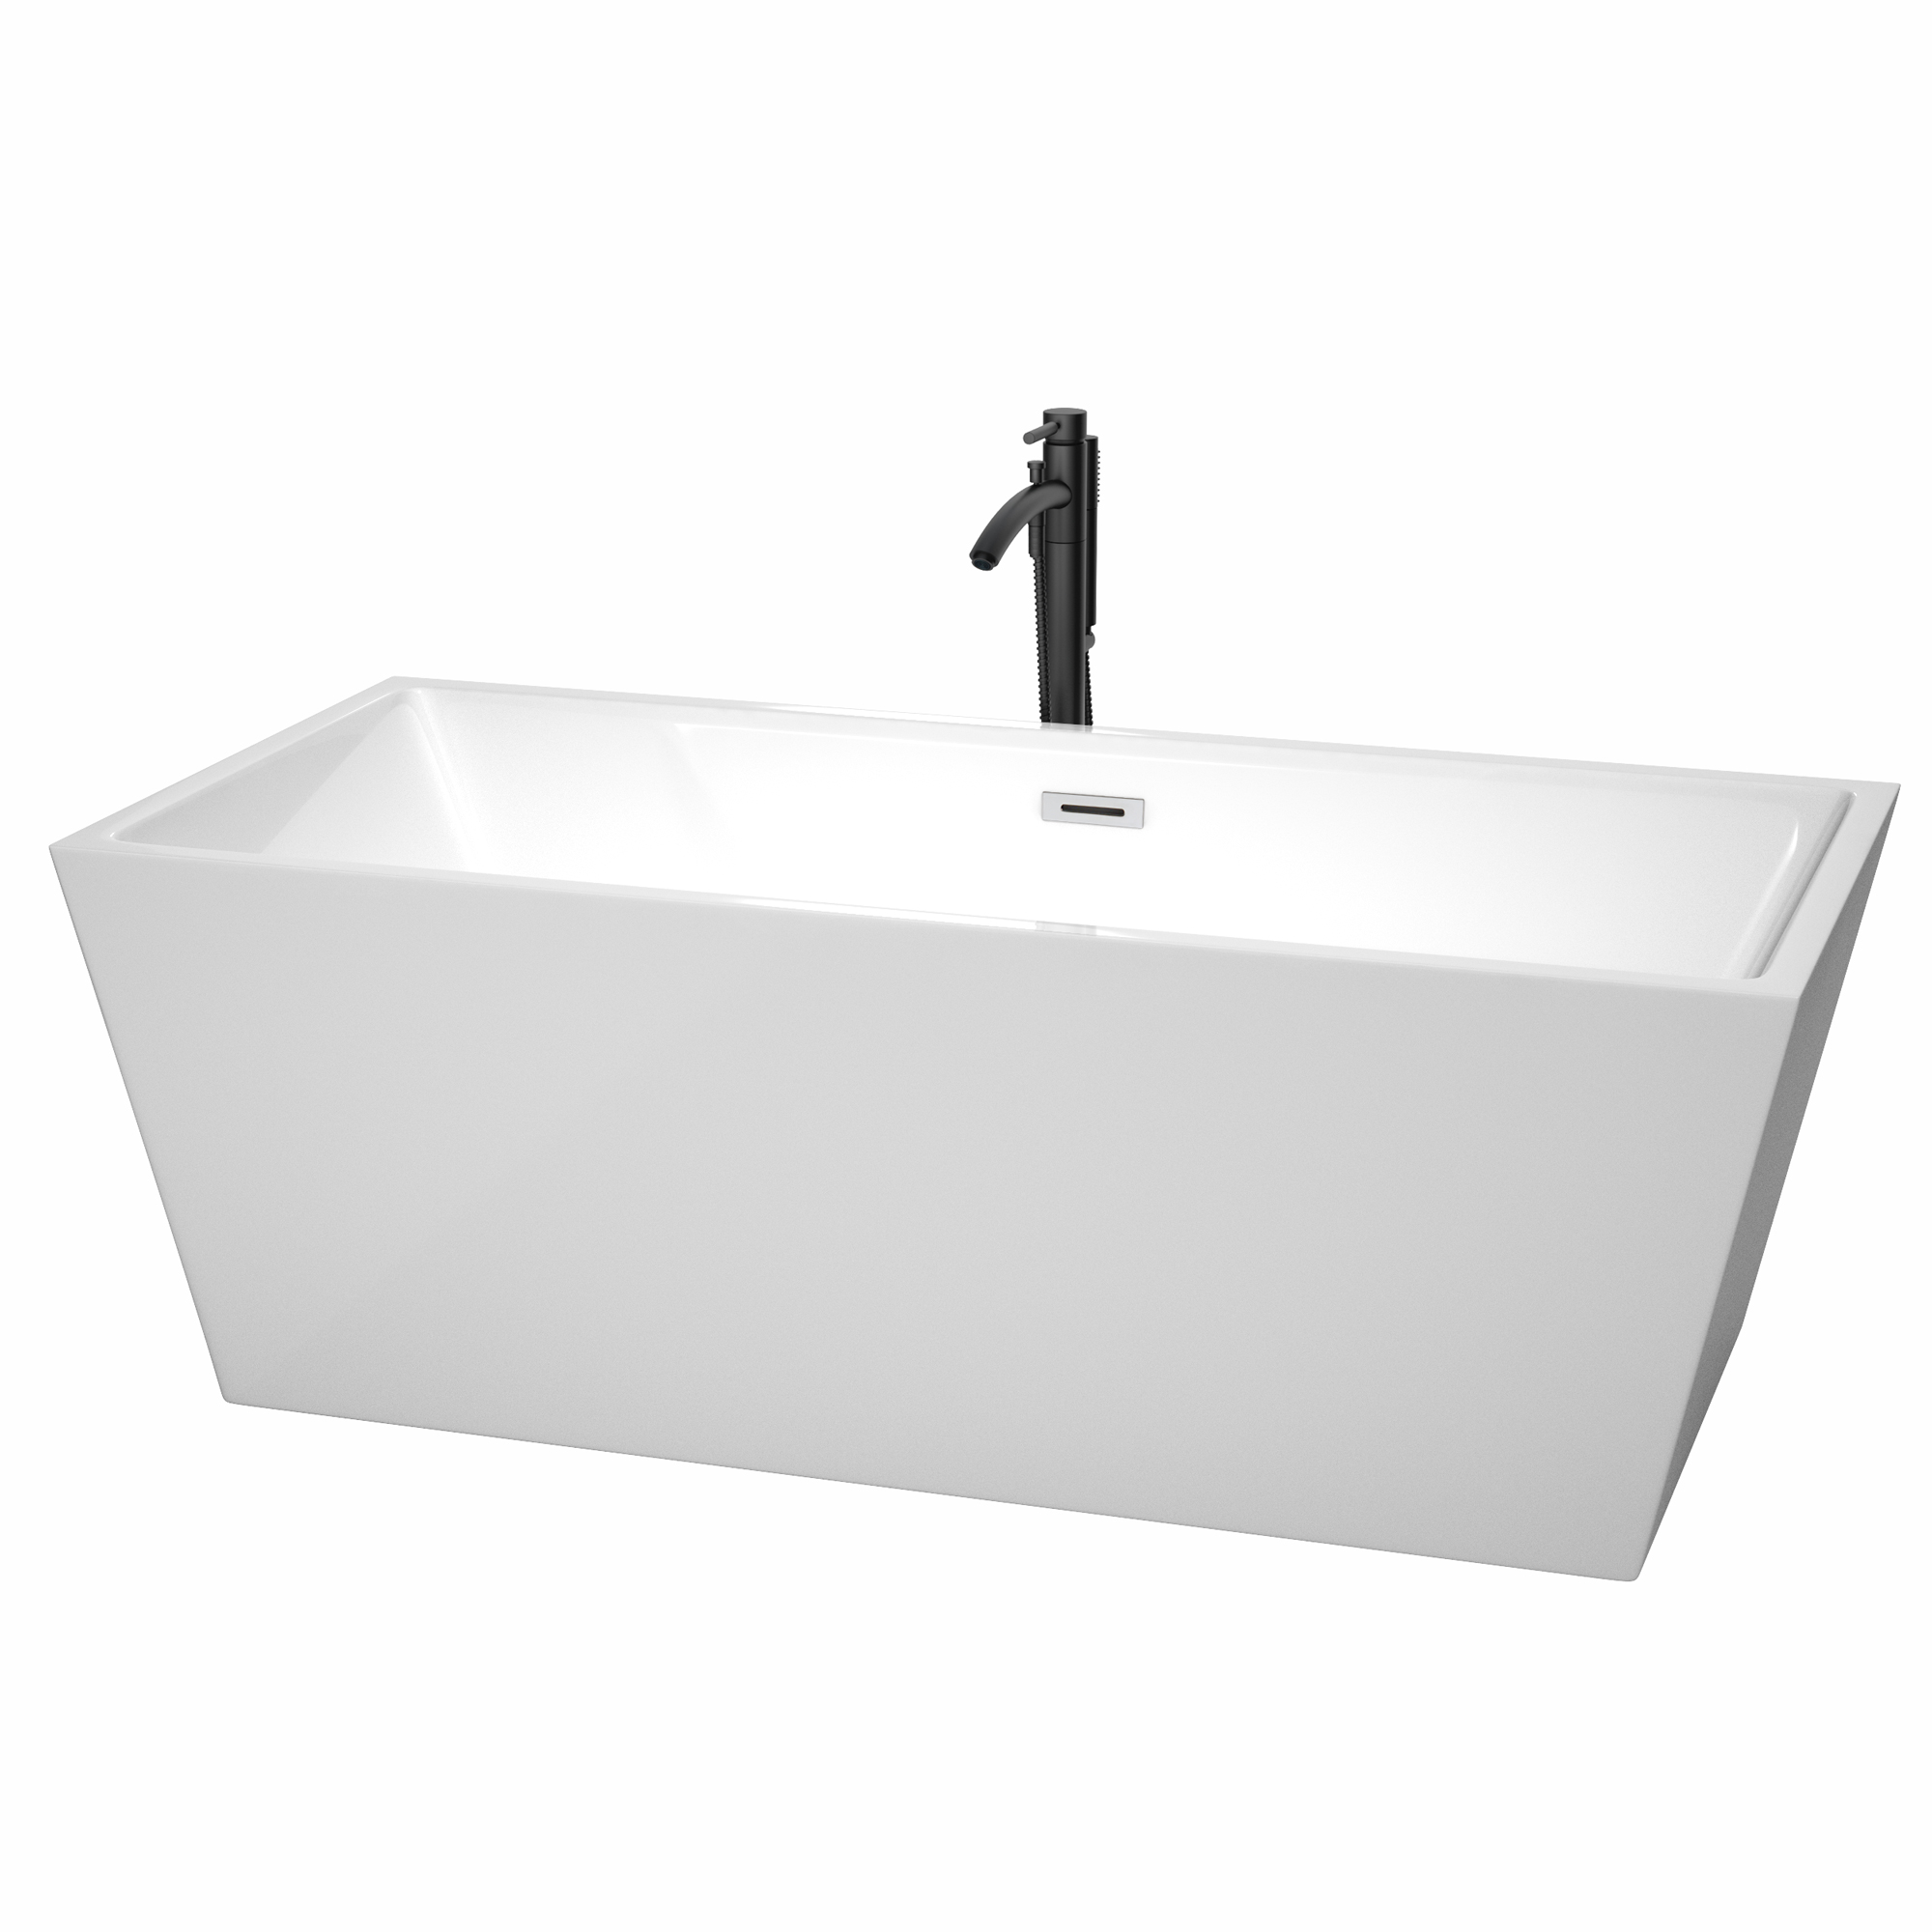 67" Freestanding Bathtub in White Finish with Polished Chrome Trim and Floor Mounted Faucet in Matte Black